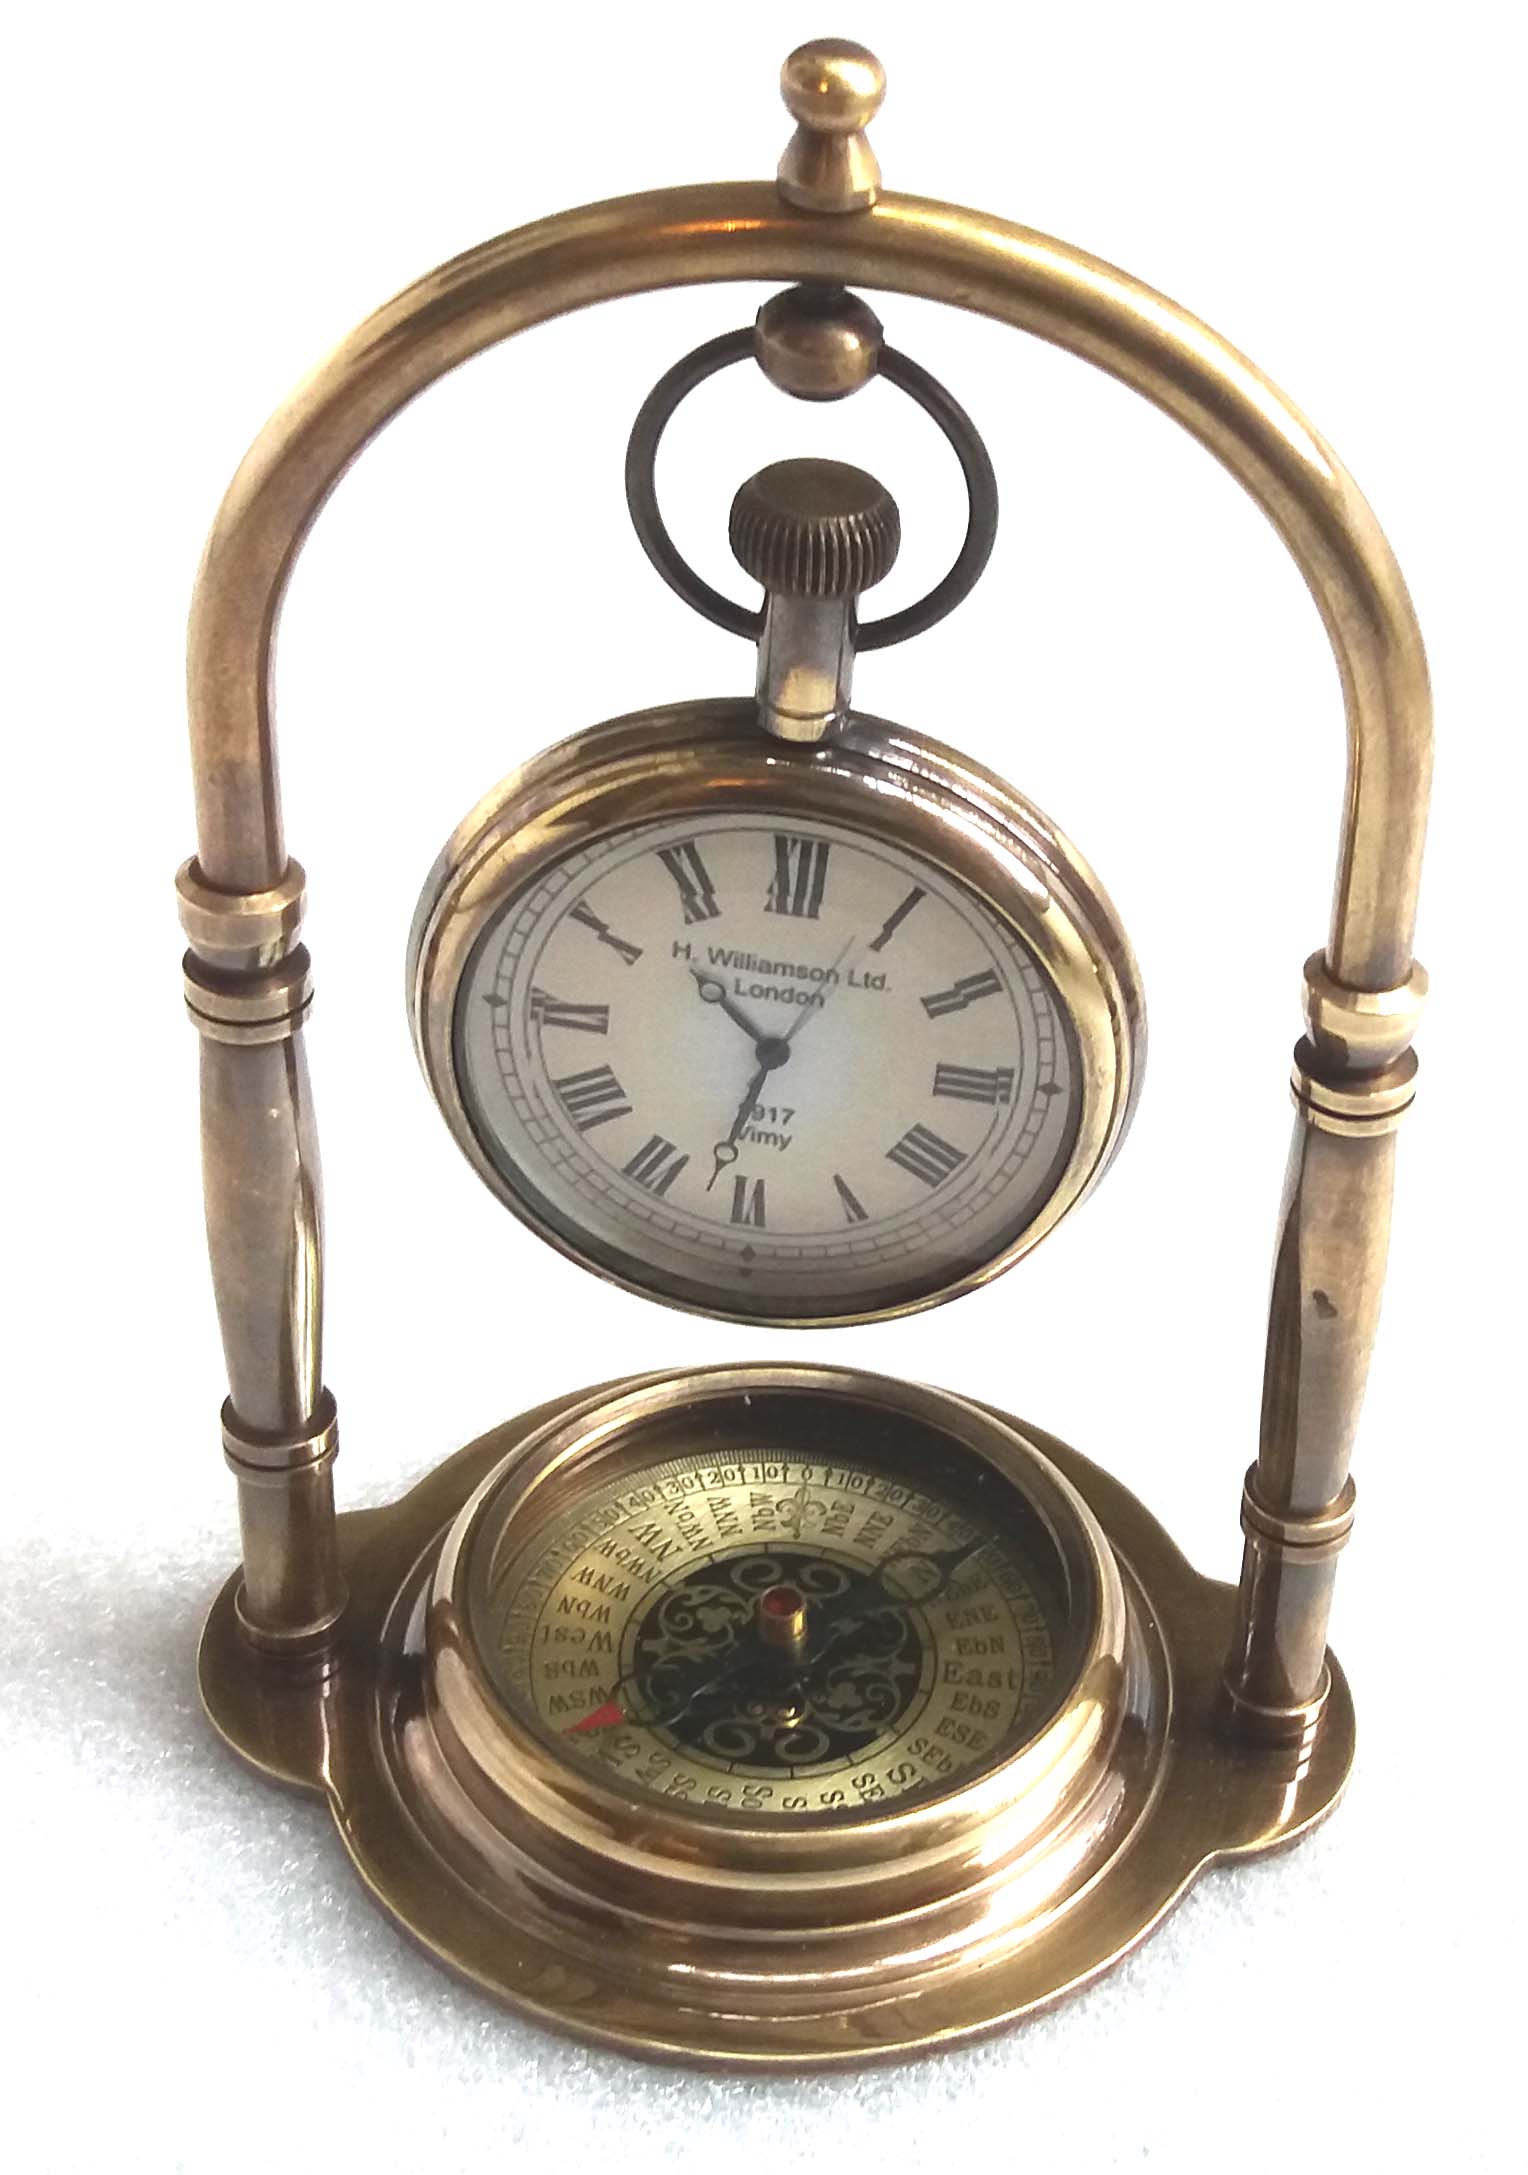 MAV home decors on Instagram: New arrivals Antique table clock available  in metal 036 8667363 for any query Code available in all over Pakistan  #homesweethome🏡 #newarrivals #limitedstock #tabledecor #metal #homedecor  #imported #tableart #